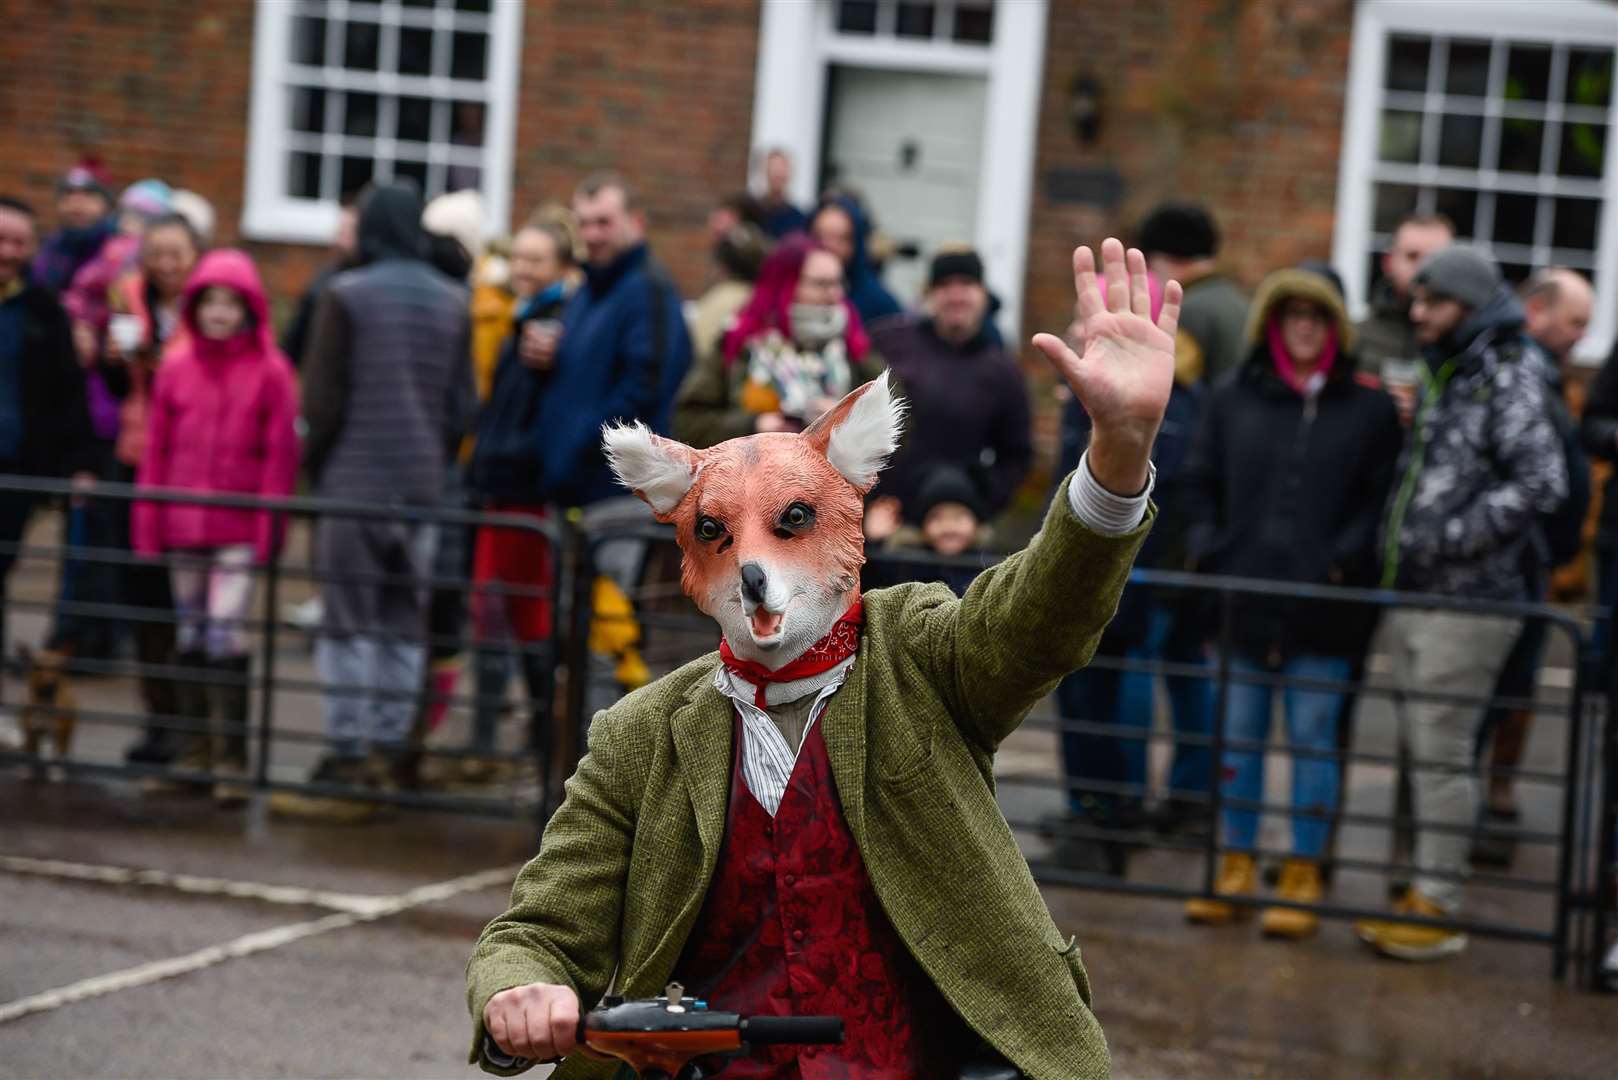 A person on a mobility scooter with a fox mask warming up the crowd before the hunt begins